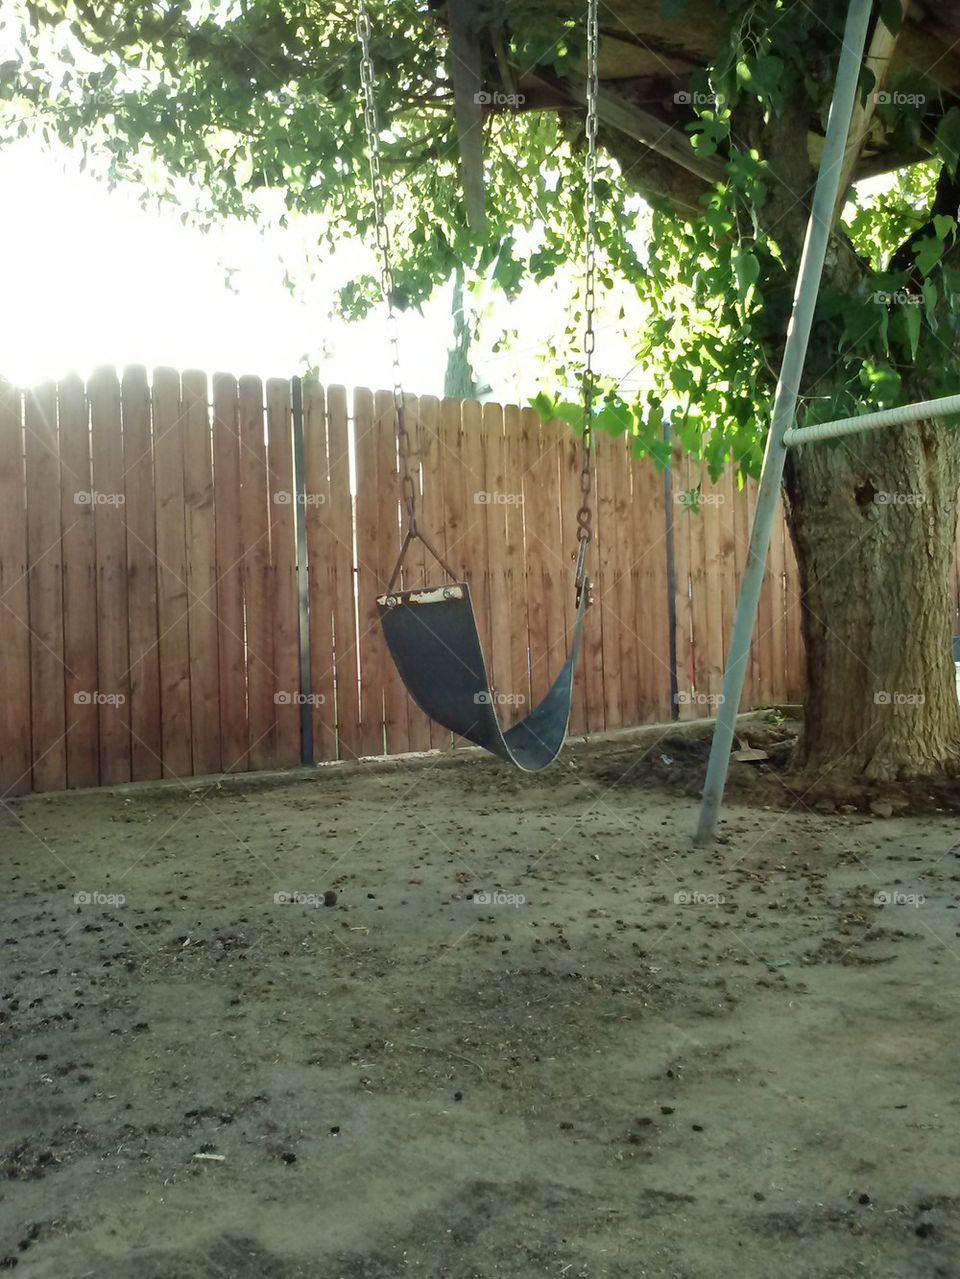 This Old Swing